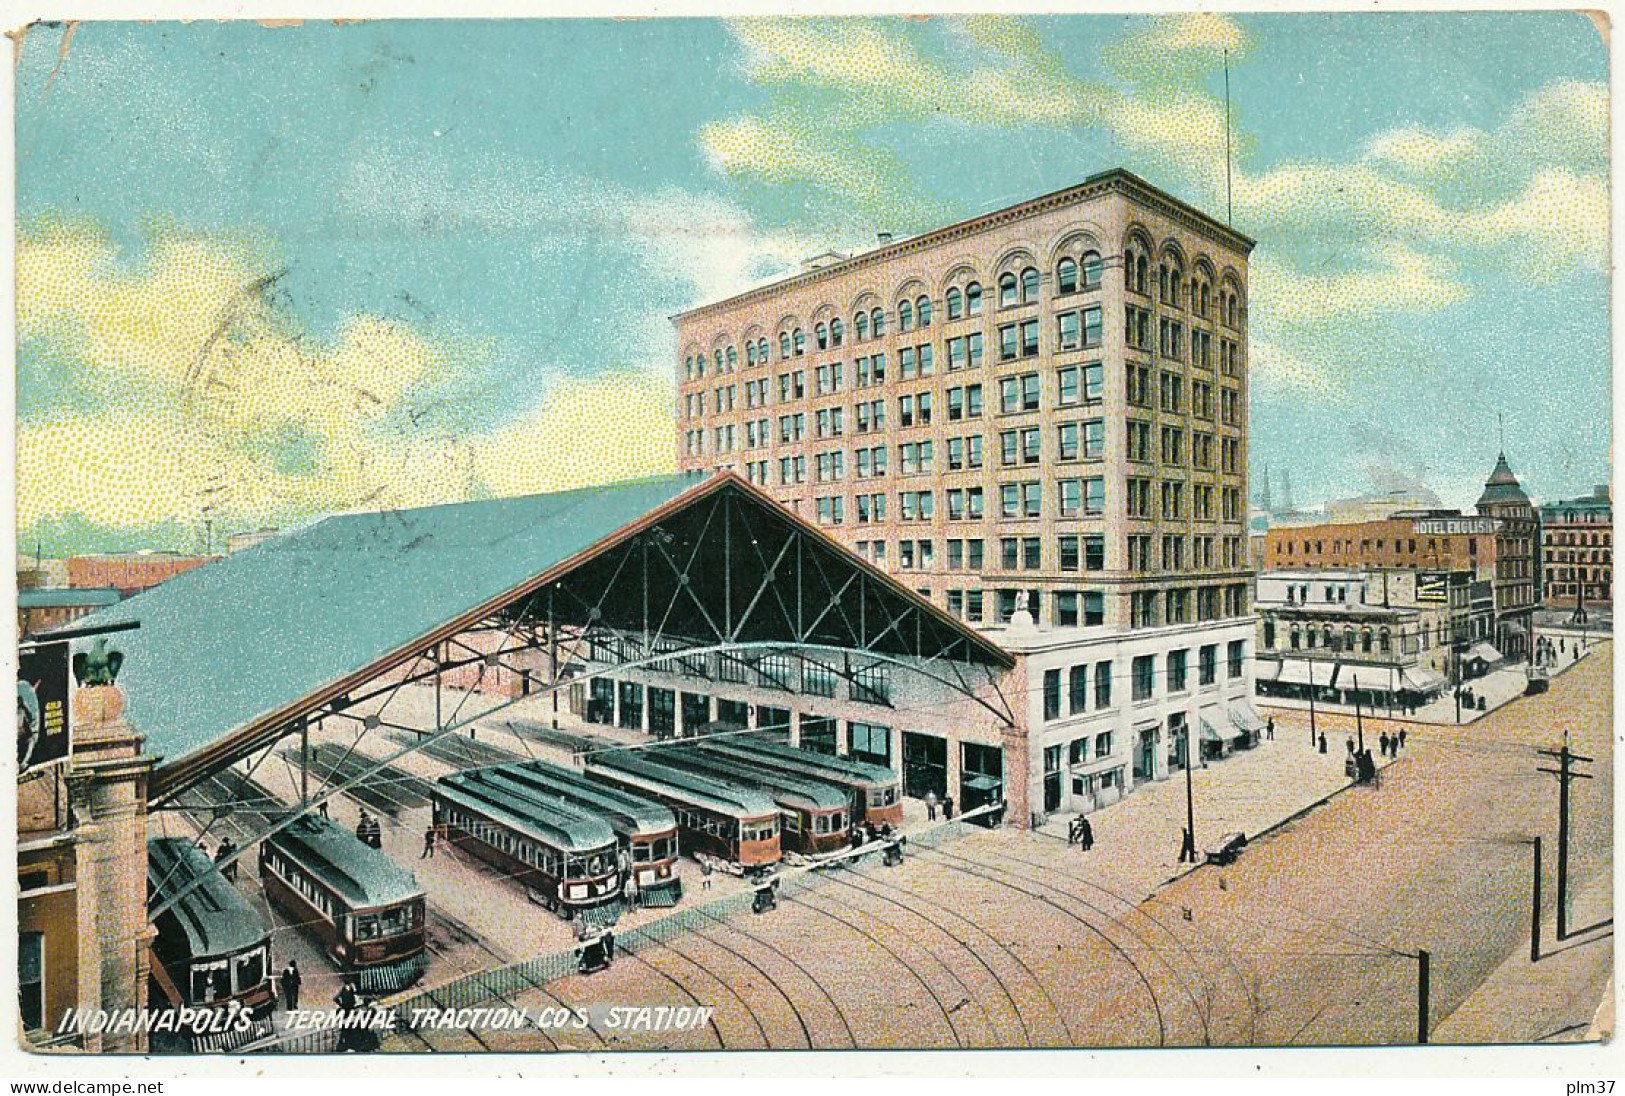 INDIANAPOLIS, IN - Terminal Traction Station - Indianapolis